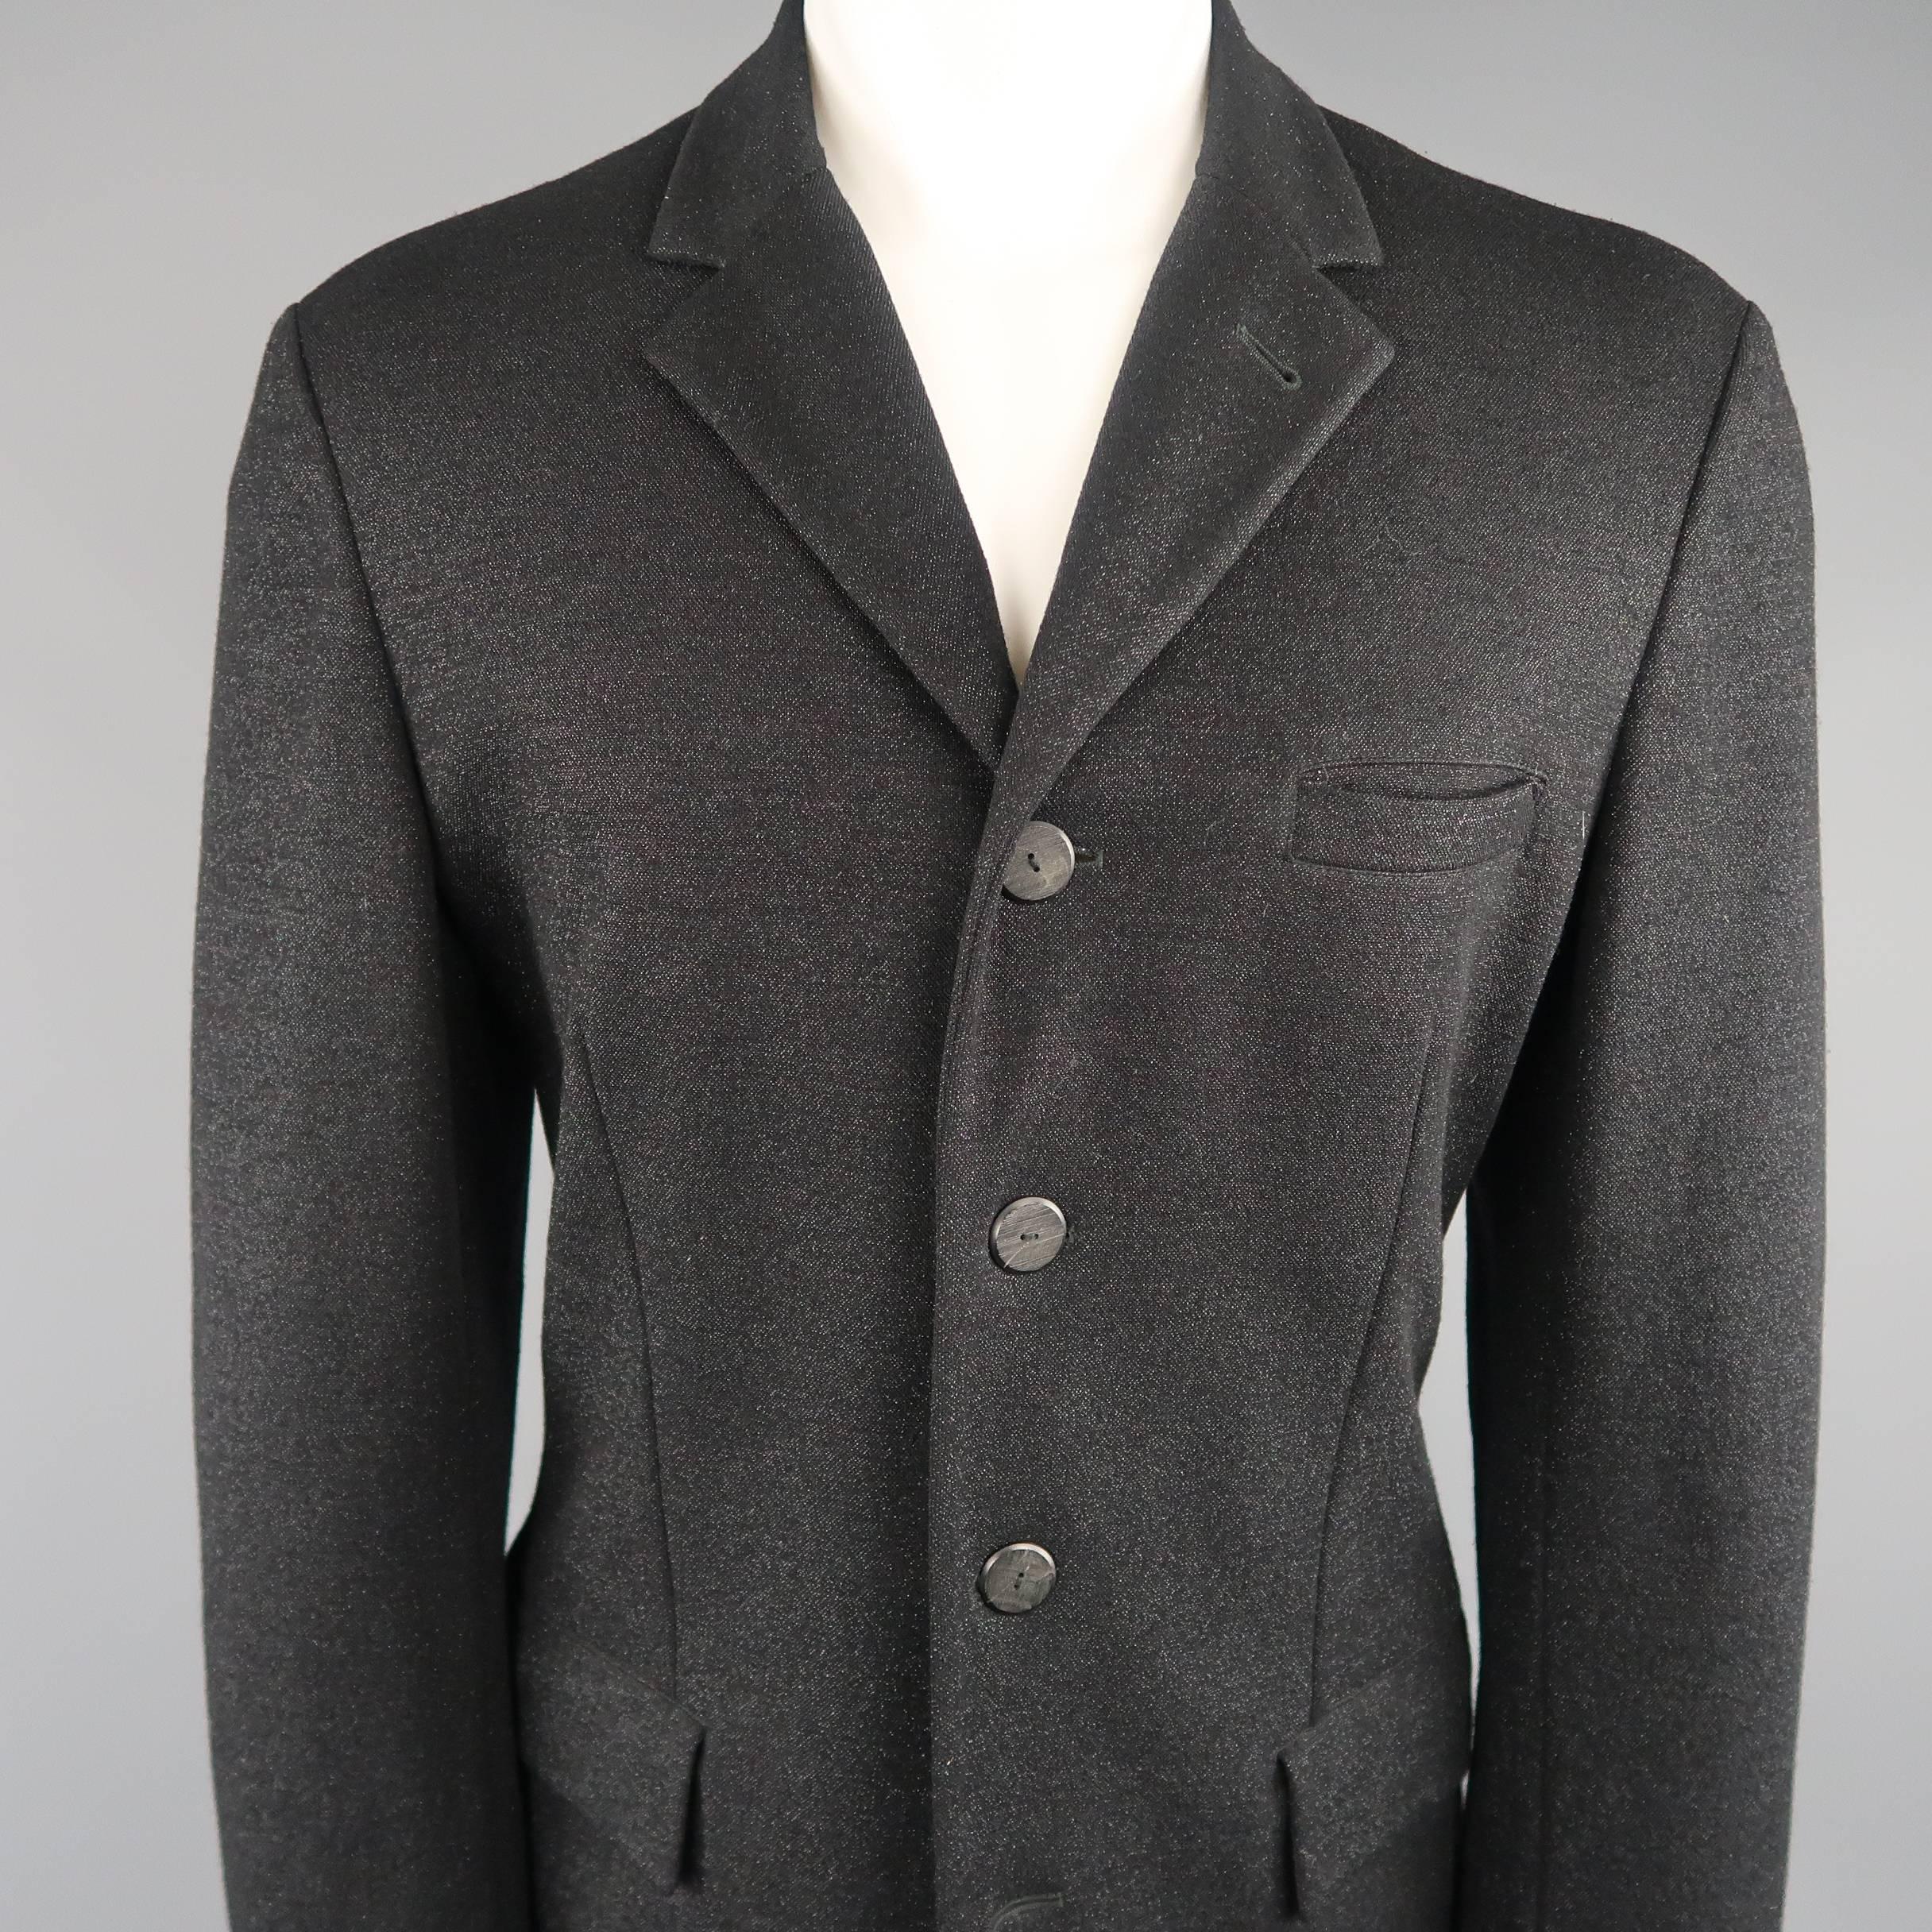 Archive JEAN PAUL GAULTIER HOMME circa 1999 sport coat comes in a black sparkle lurex material with a notch lapel, four wooden button front, and functional button cuffs. Made in Italy.
 
Excellent Pre-Owned Condition.
Marked: 40
 
Measurements:
